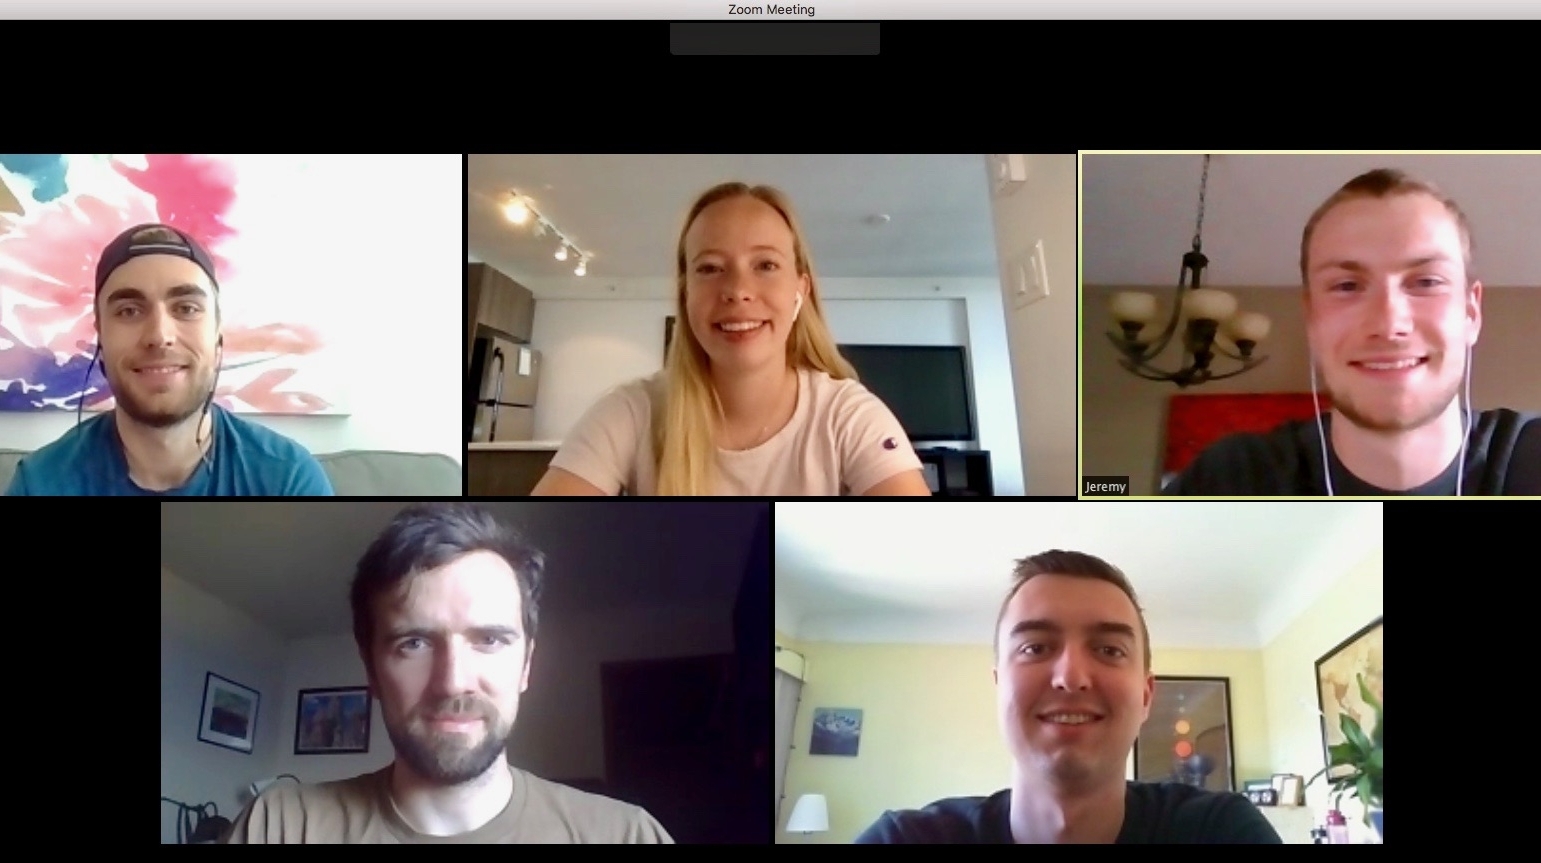 Screenshot of a Zoom meeting showing the five members of the team.